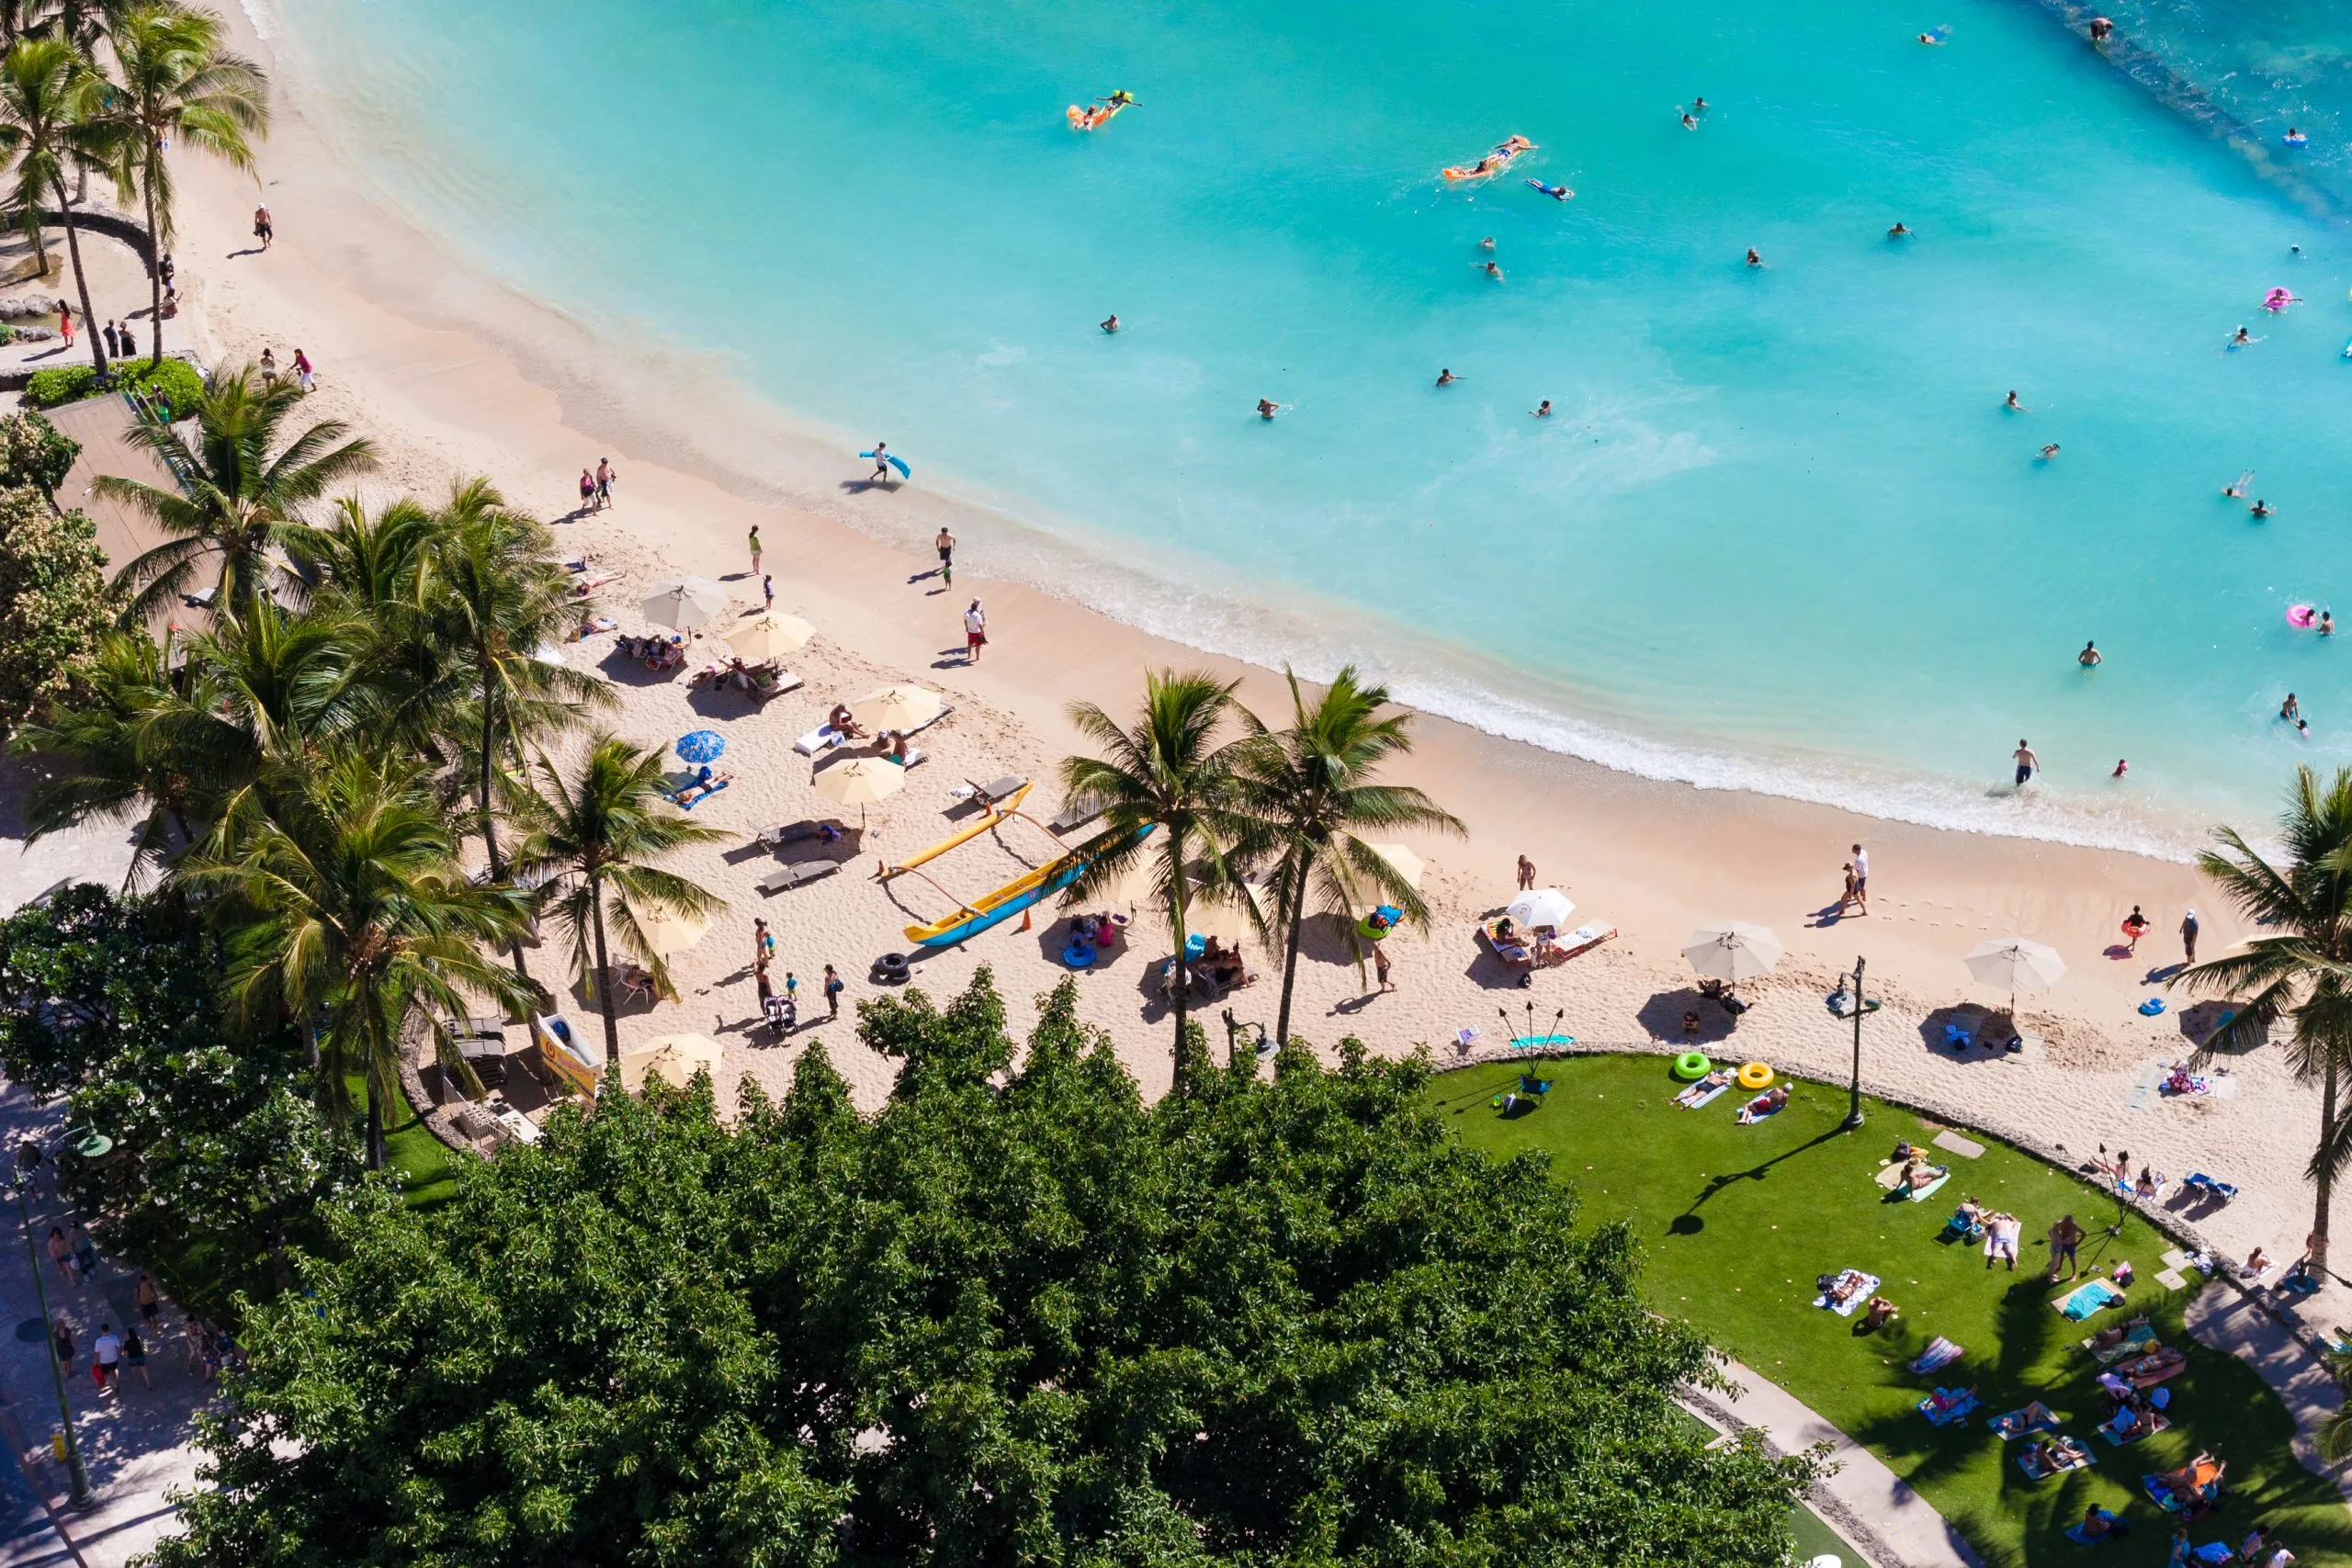 waikiki beach as seen from above, one of the top attractions in oahu hawaii places to visit